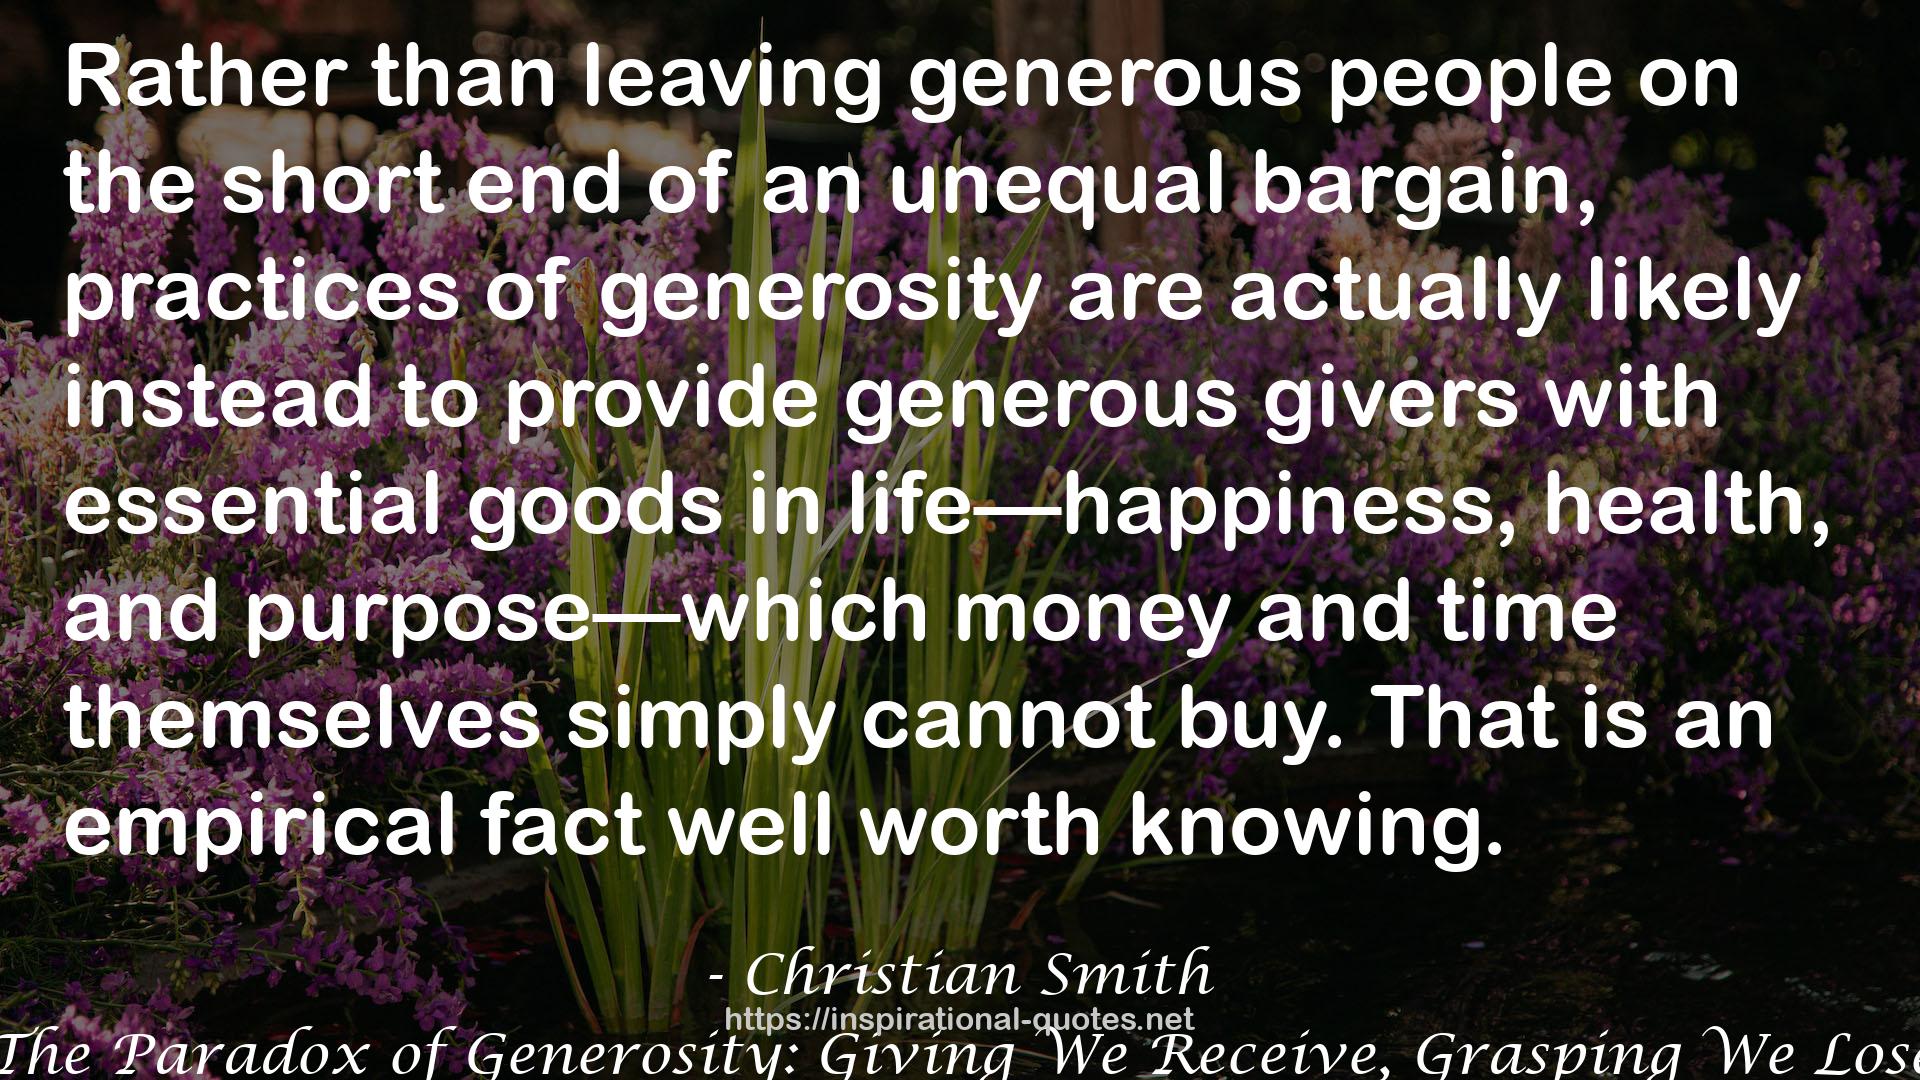 The Paradox of Generosity: Giving We Receive, Grasping We Lose QUOTES